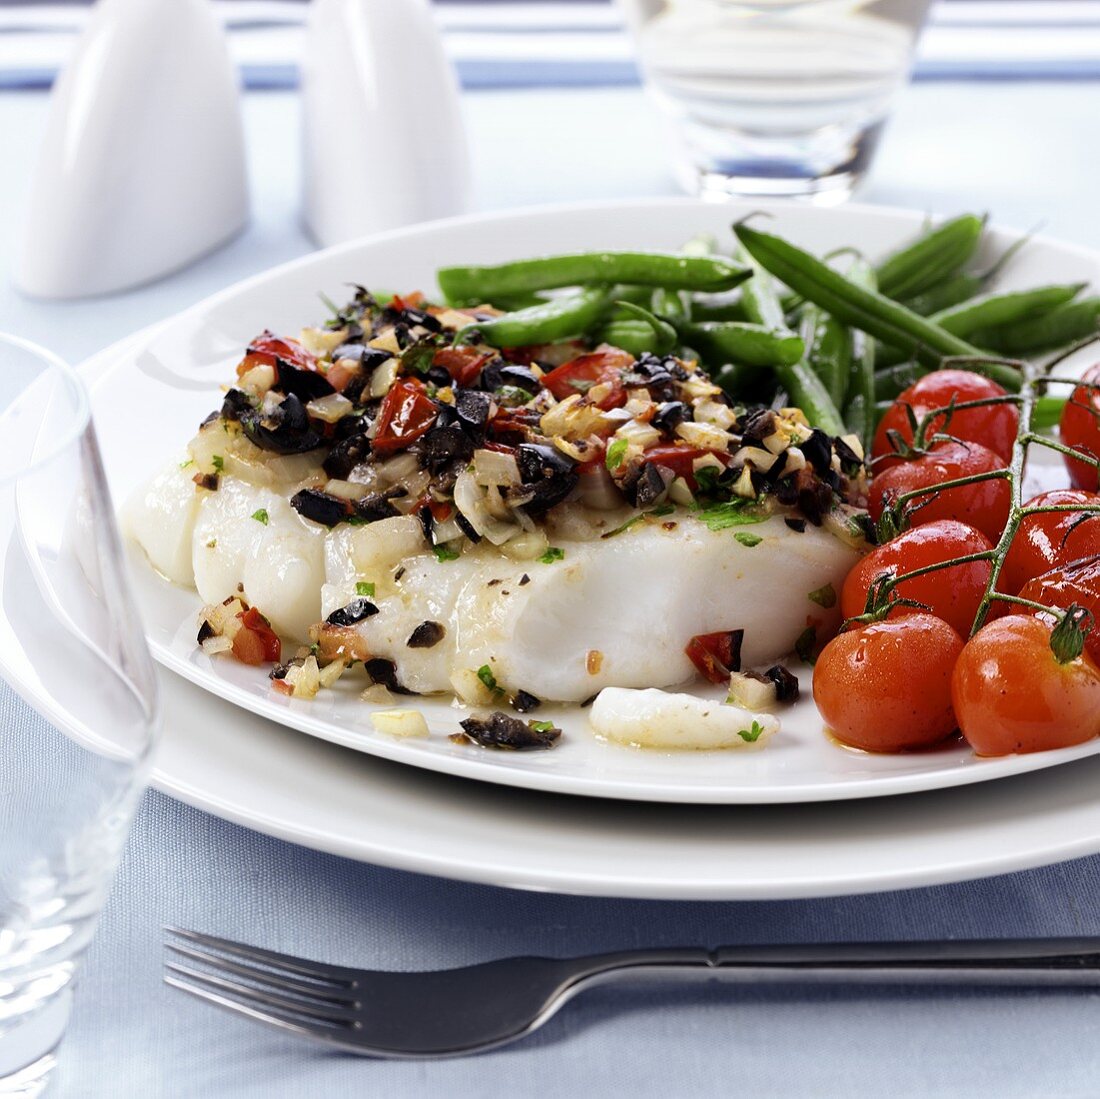 Cod fillet with tomato and olive crust